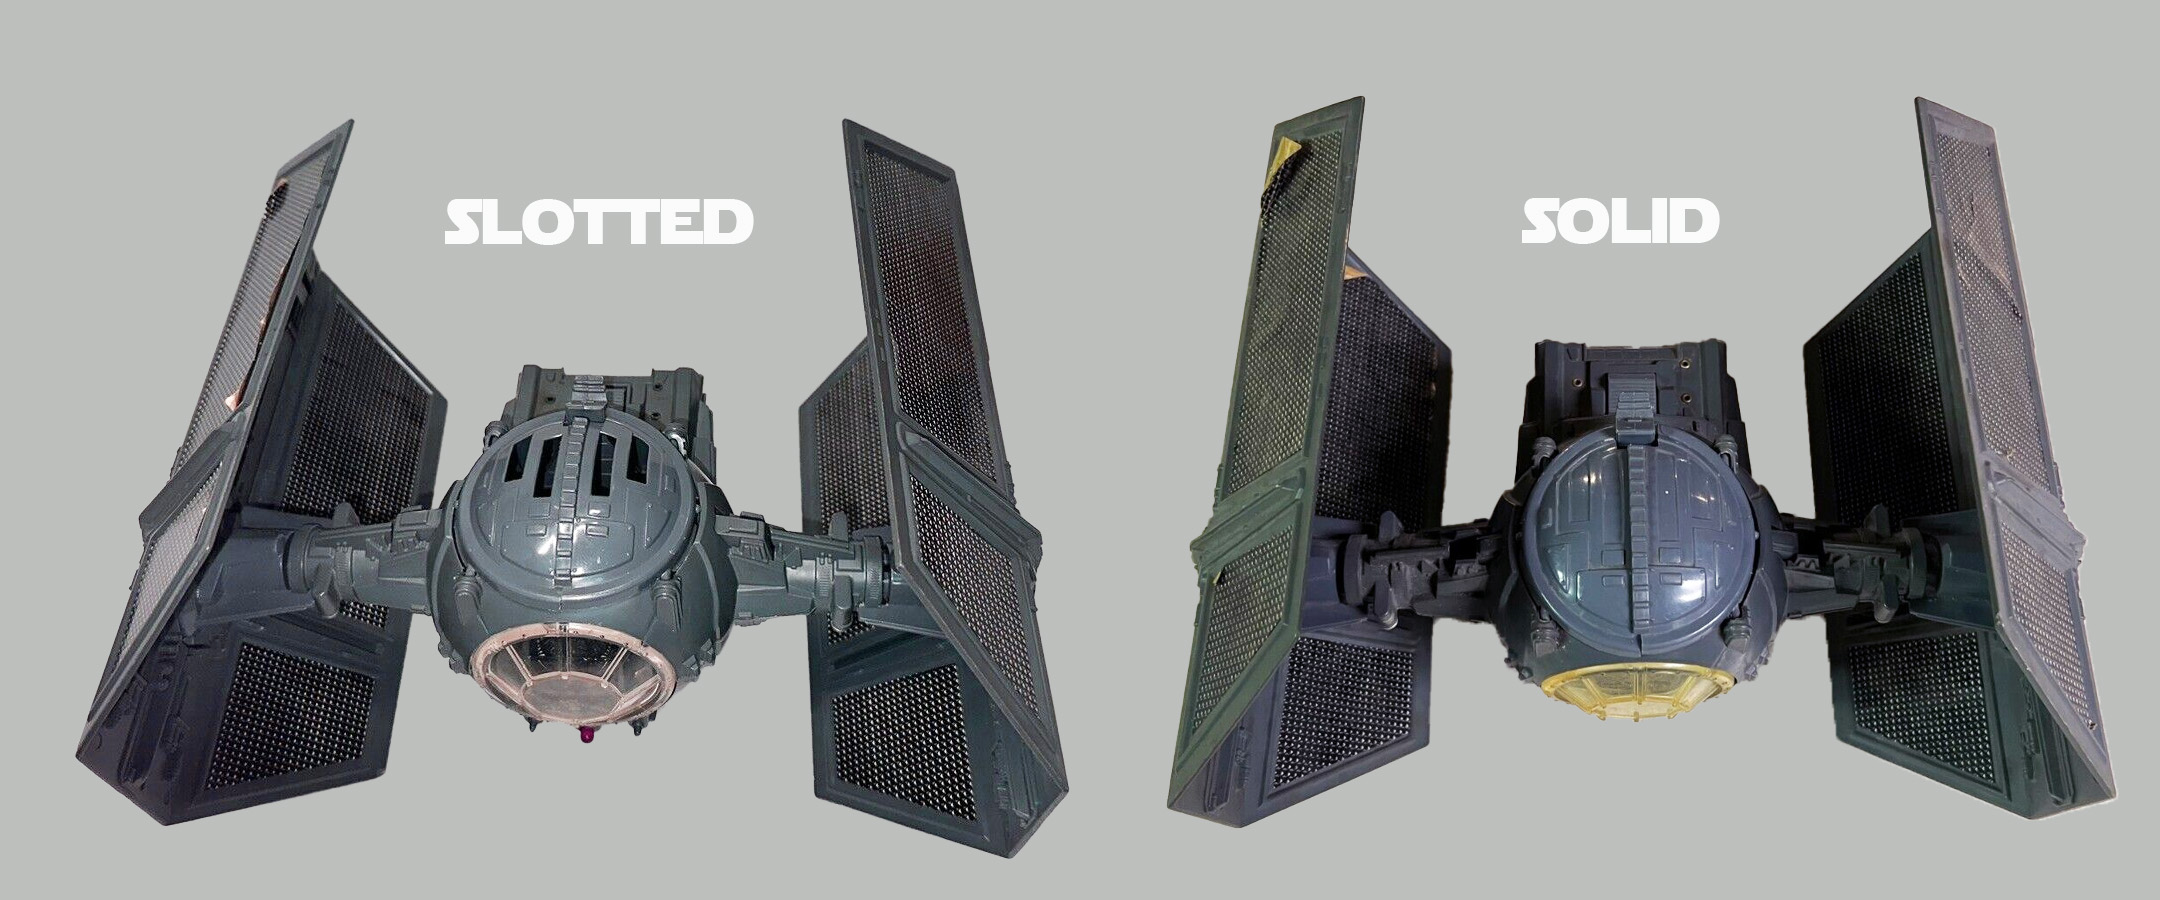 The Darth Vader TIE Fighter might have either a slotted or solid top hatch.